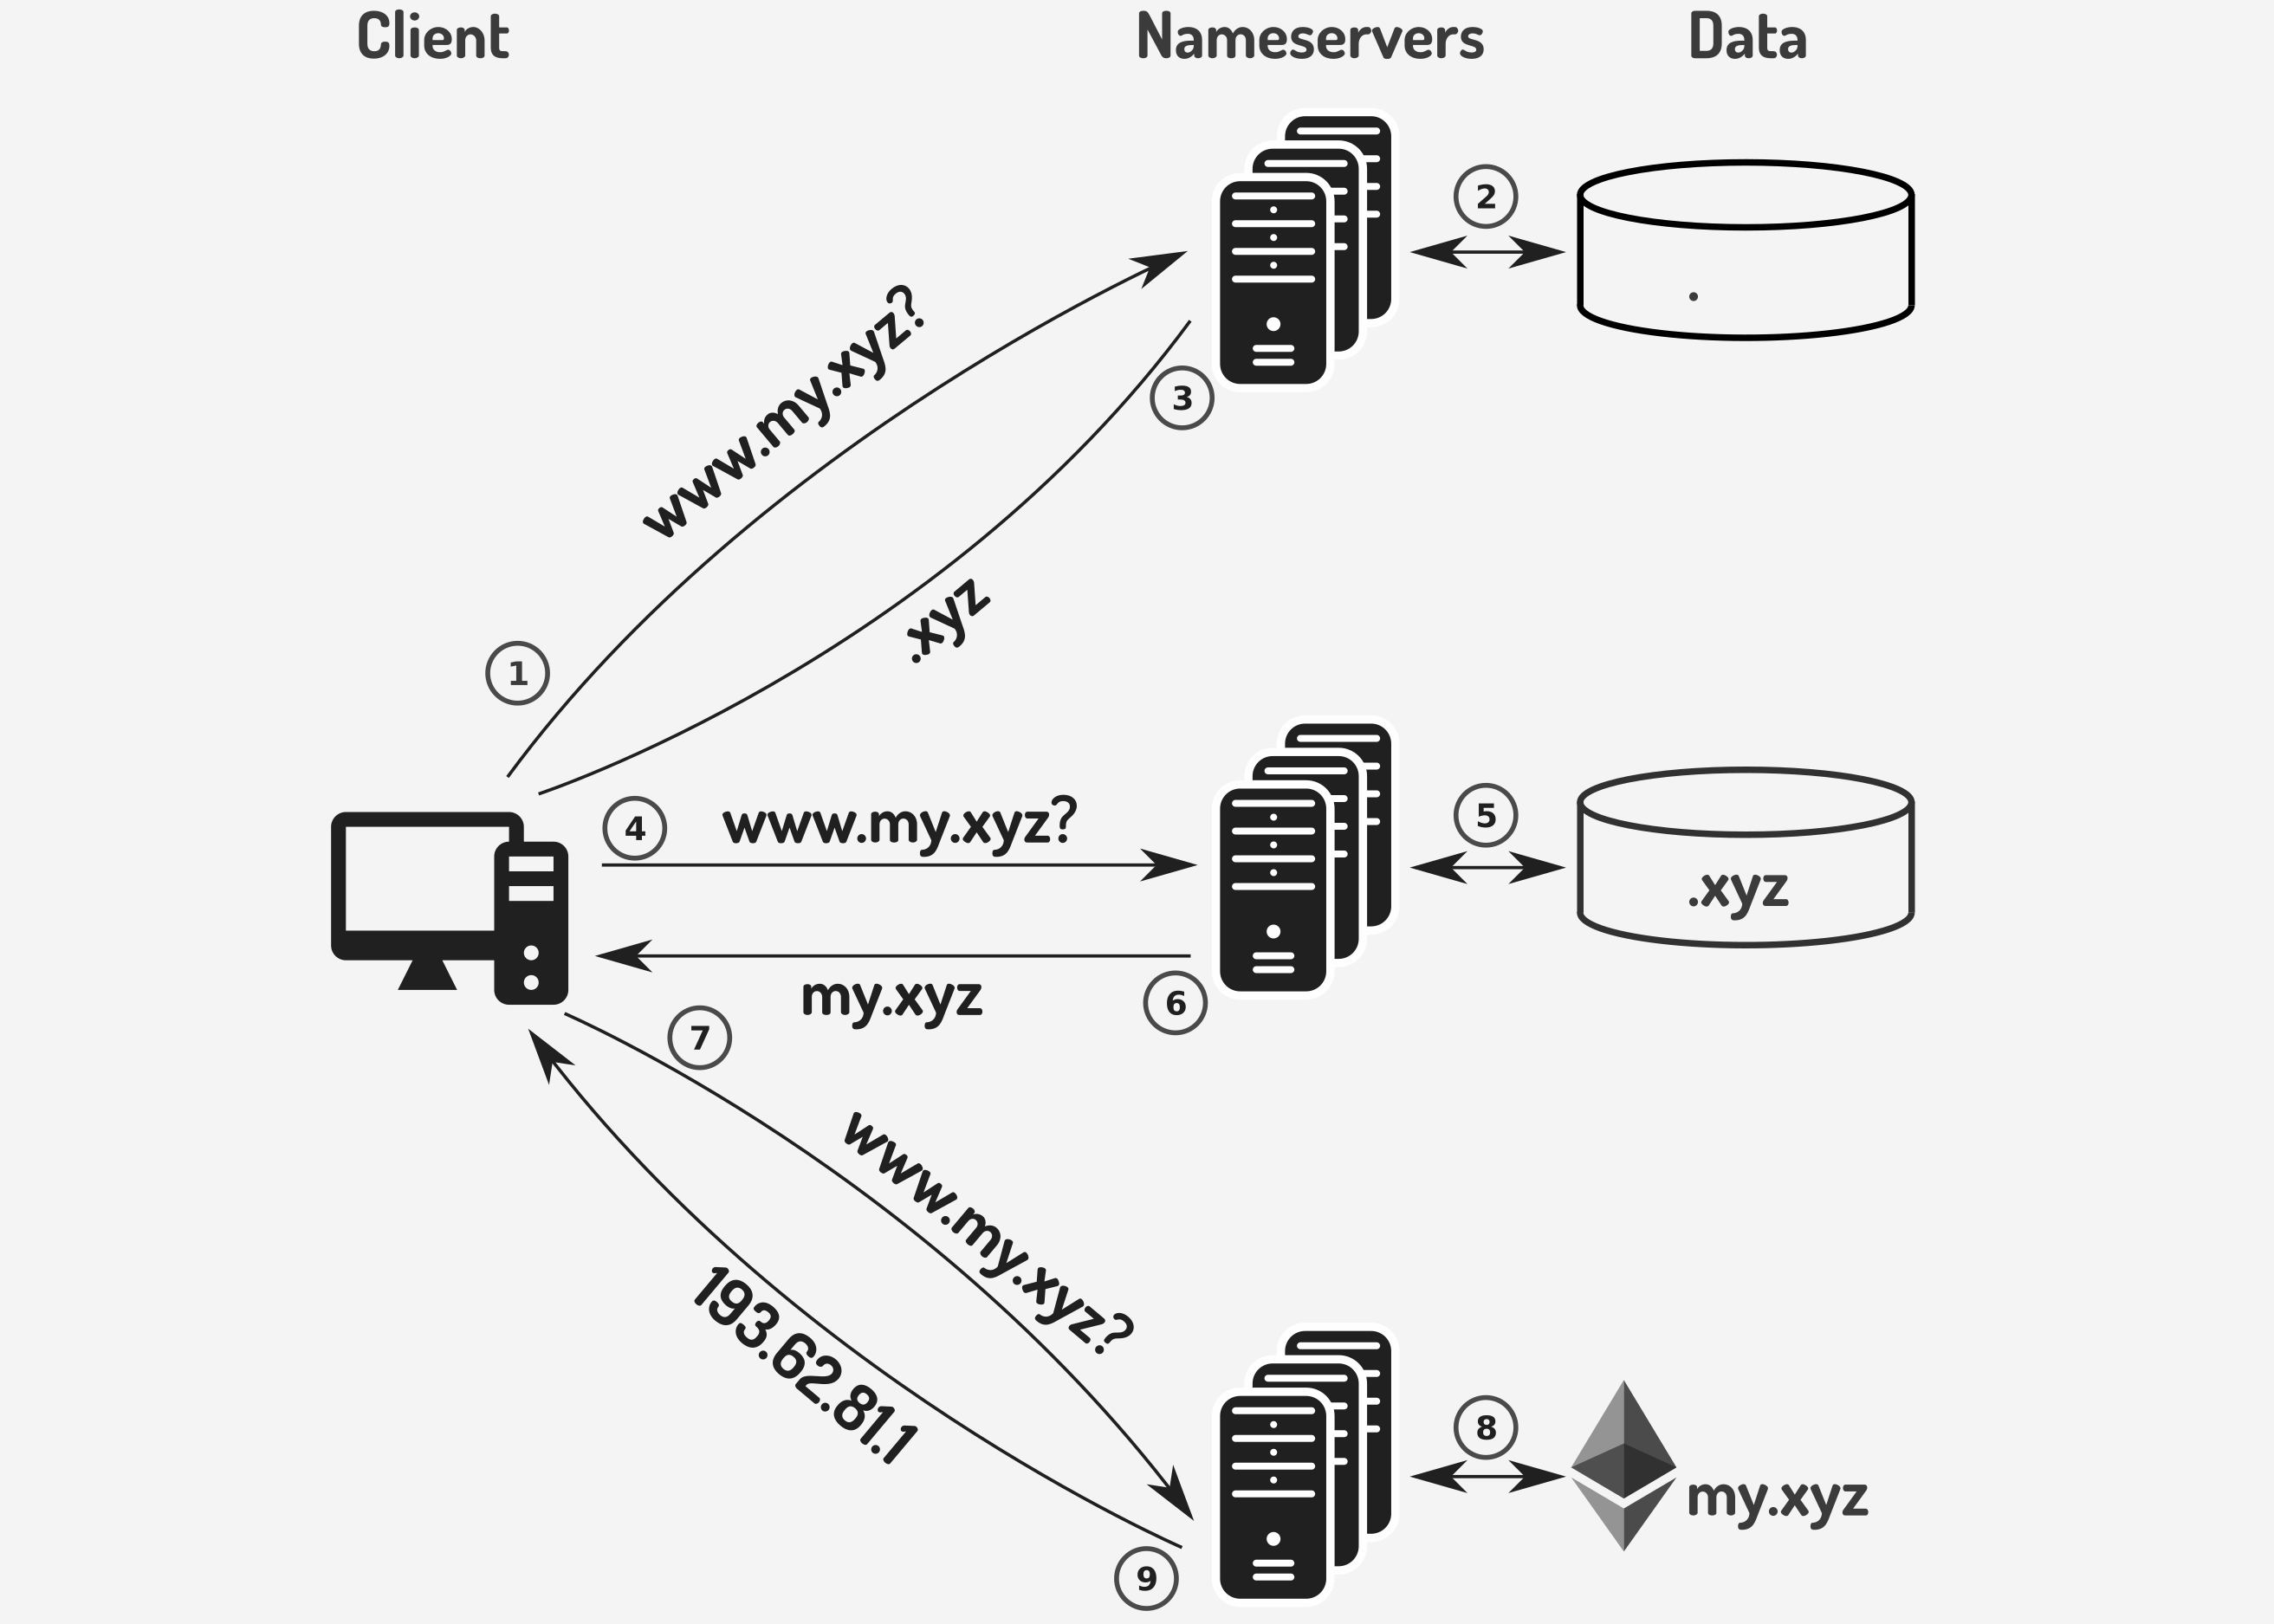 DNS nameserver infrastructure with EthDNS serving my.xyz